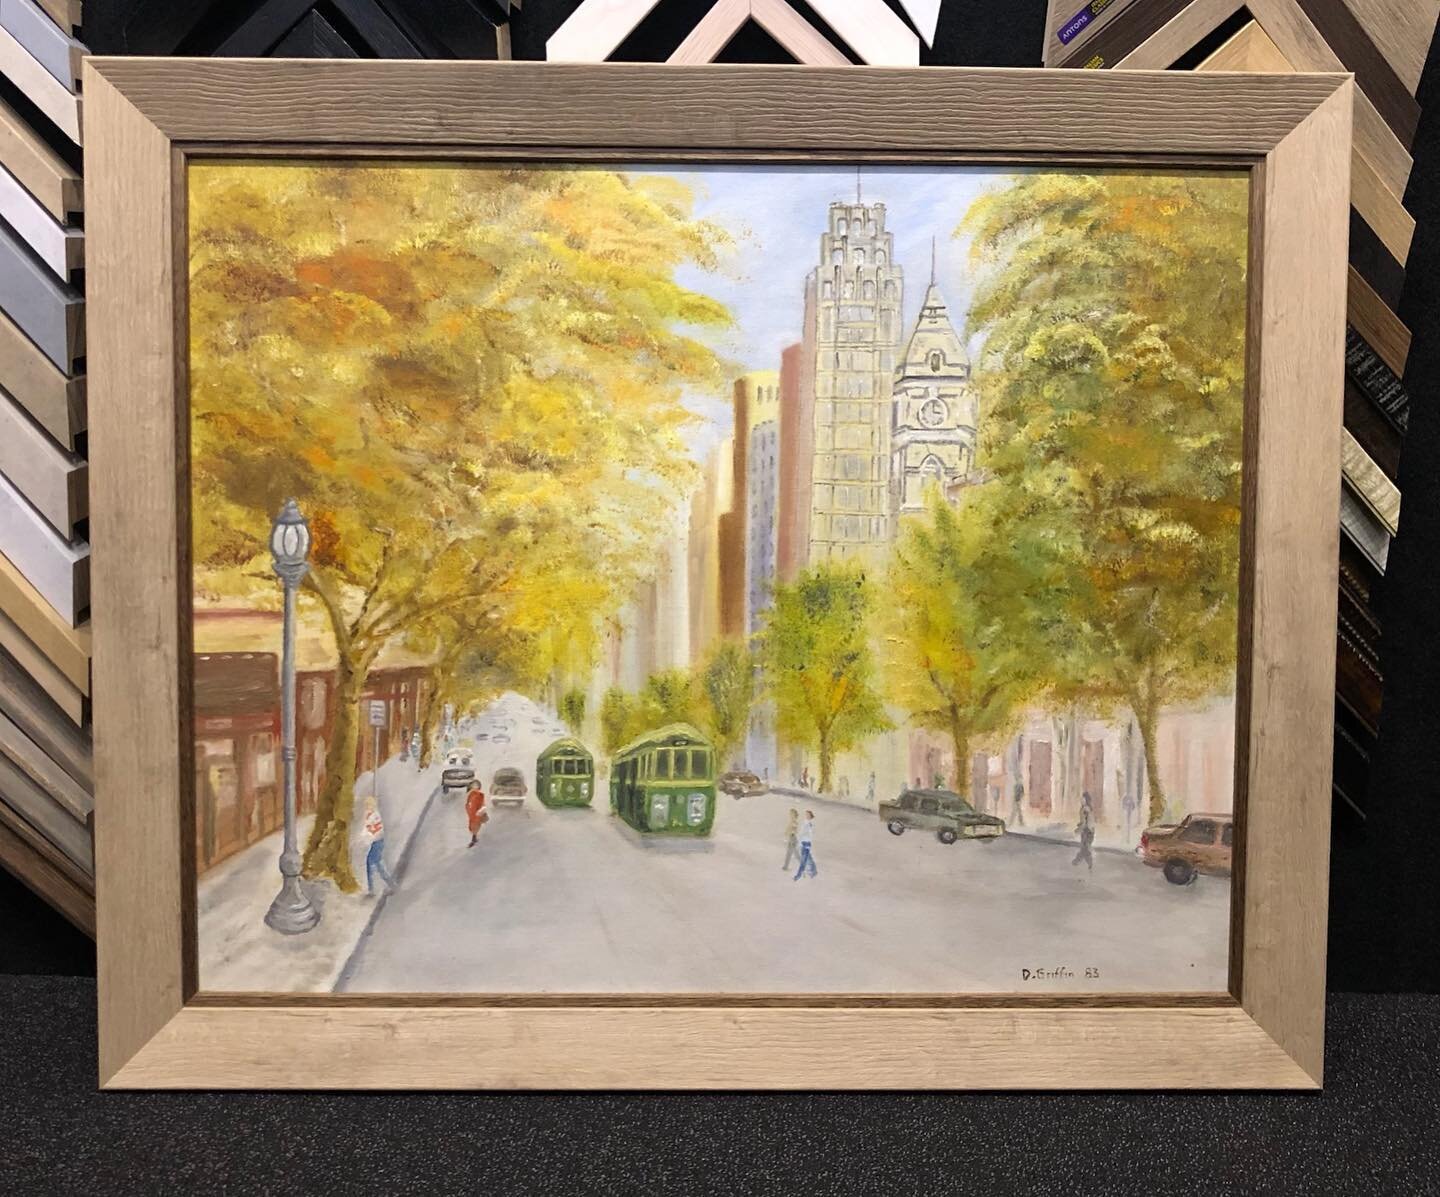 A frame really can elevate artwork 😍
Enjoy this &lsquo;after&rsquo;, swipe to see the before. 

Come in store for a free quote. 

#alburypictureframers #alburywodonga #alburyframing #alburyframer #pictureframing #customframing